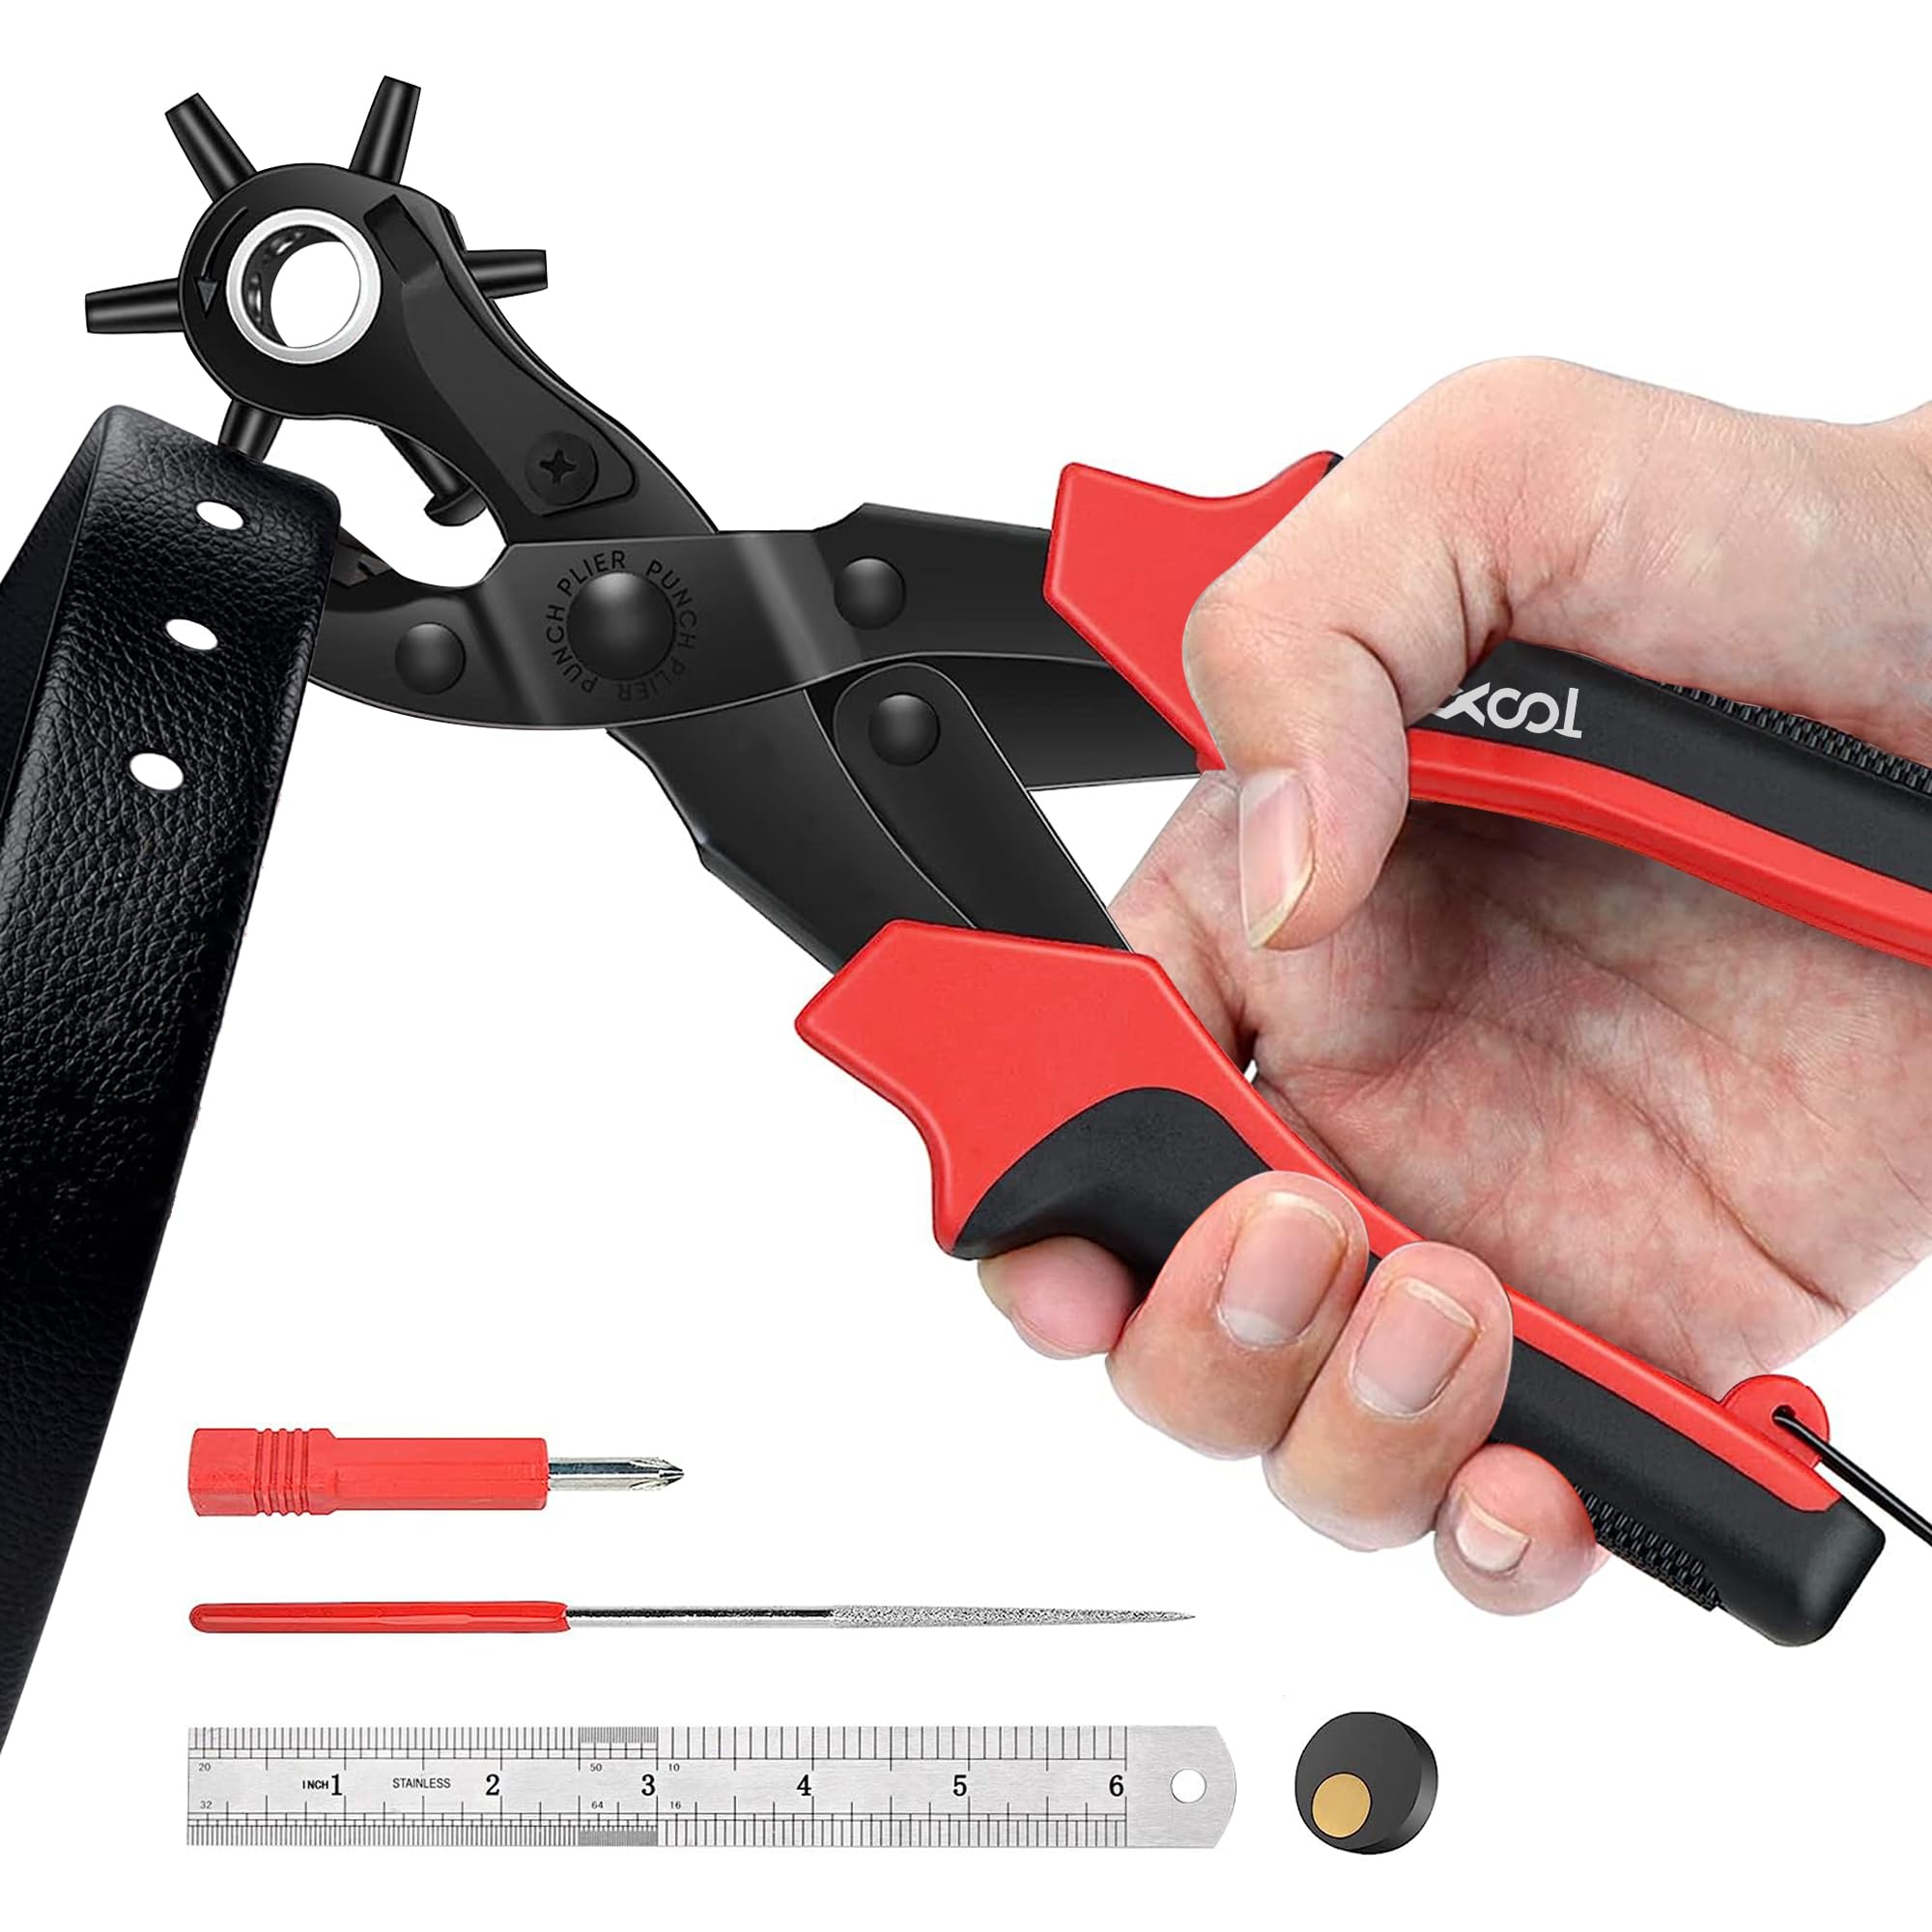 Revolving Punch Plier Kit, XOOL Leather Hole Punch Set for Belts, Watch Bands, Straps, Dog Collars, Saddles, Shoes, Fabric, DIY Home or Craft Projects, Heavy Duty Rotary Puncher, Multi Hole Sizes Make